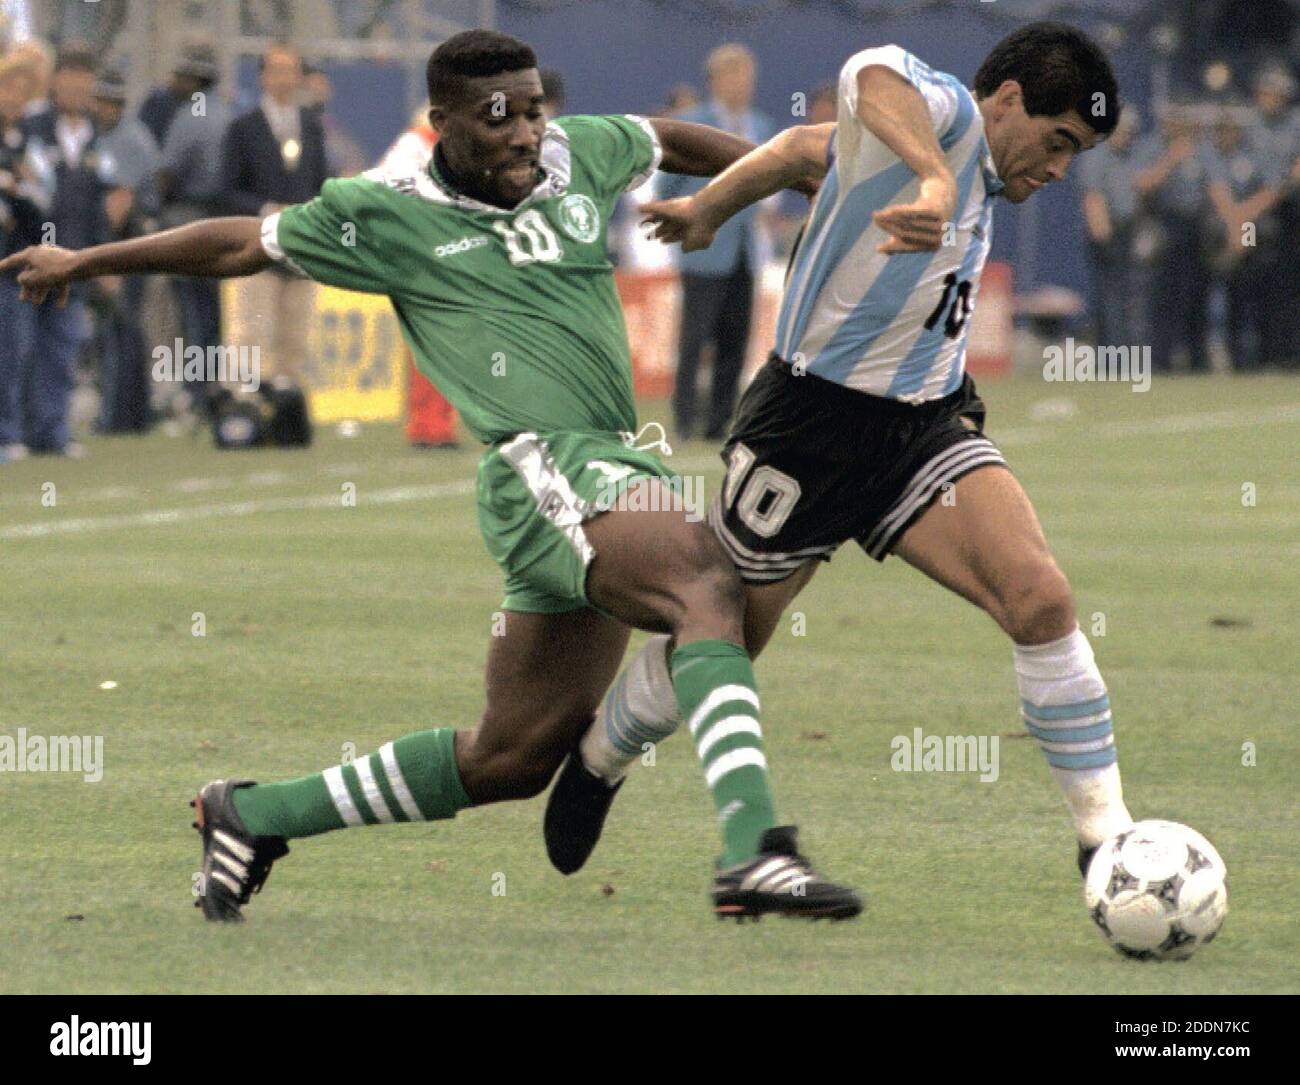 File Photo Taken In June 1994 Shows Argentina S Diego Maradona R And Nigeria S Jay Jay Okocha In A World Cup Football Group Phase Match In Boston The United States Maradona Died On Nov